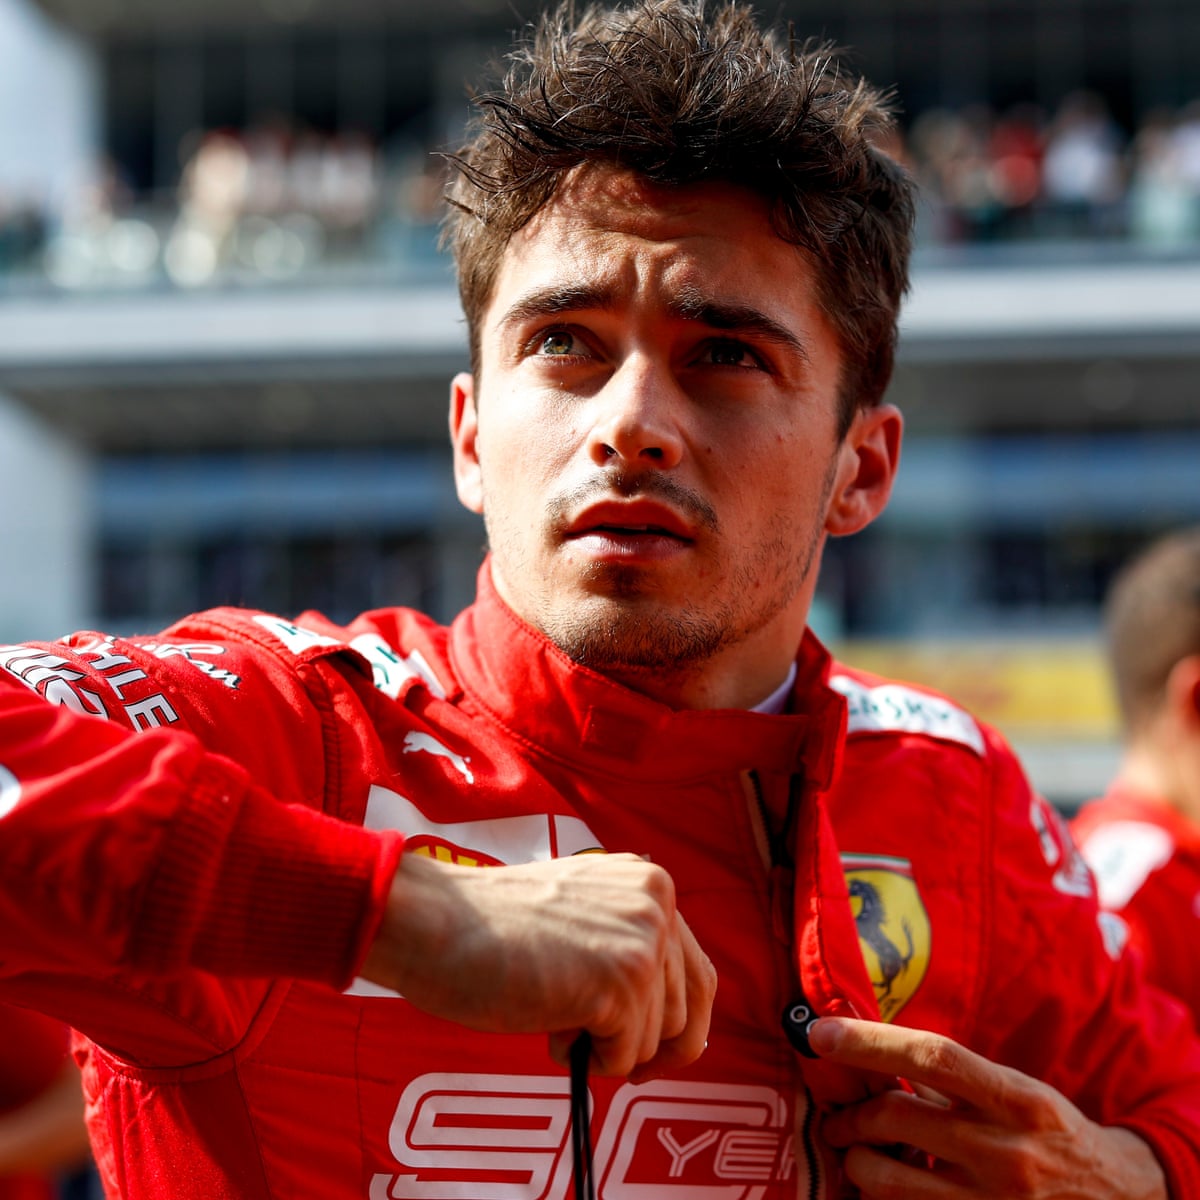 The knocks keep coming at Ferrari but Charles Leclerc is learning fast |  Formula One 2019 | The Guardian